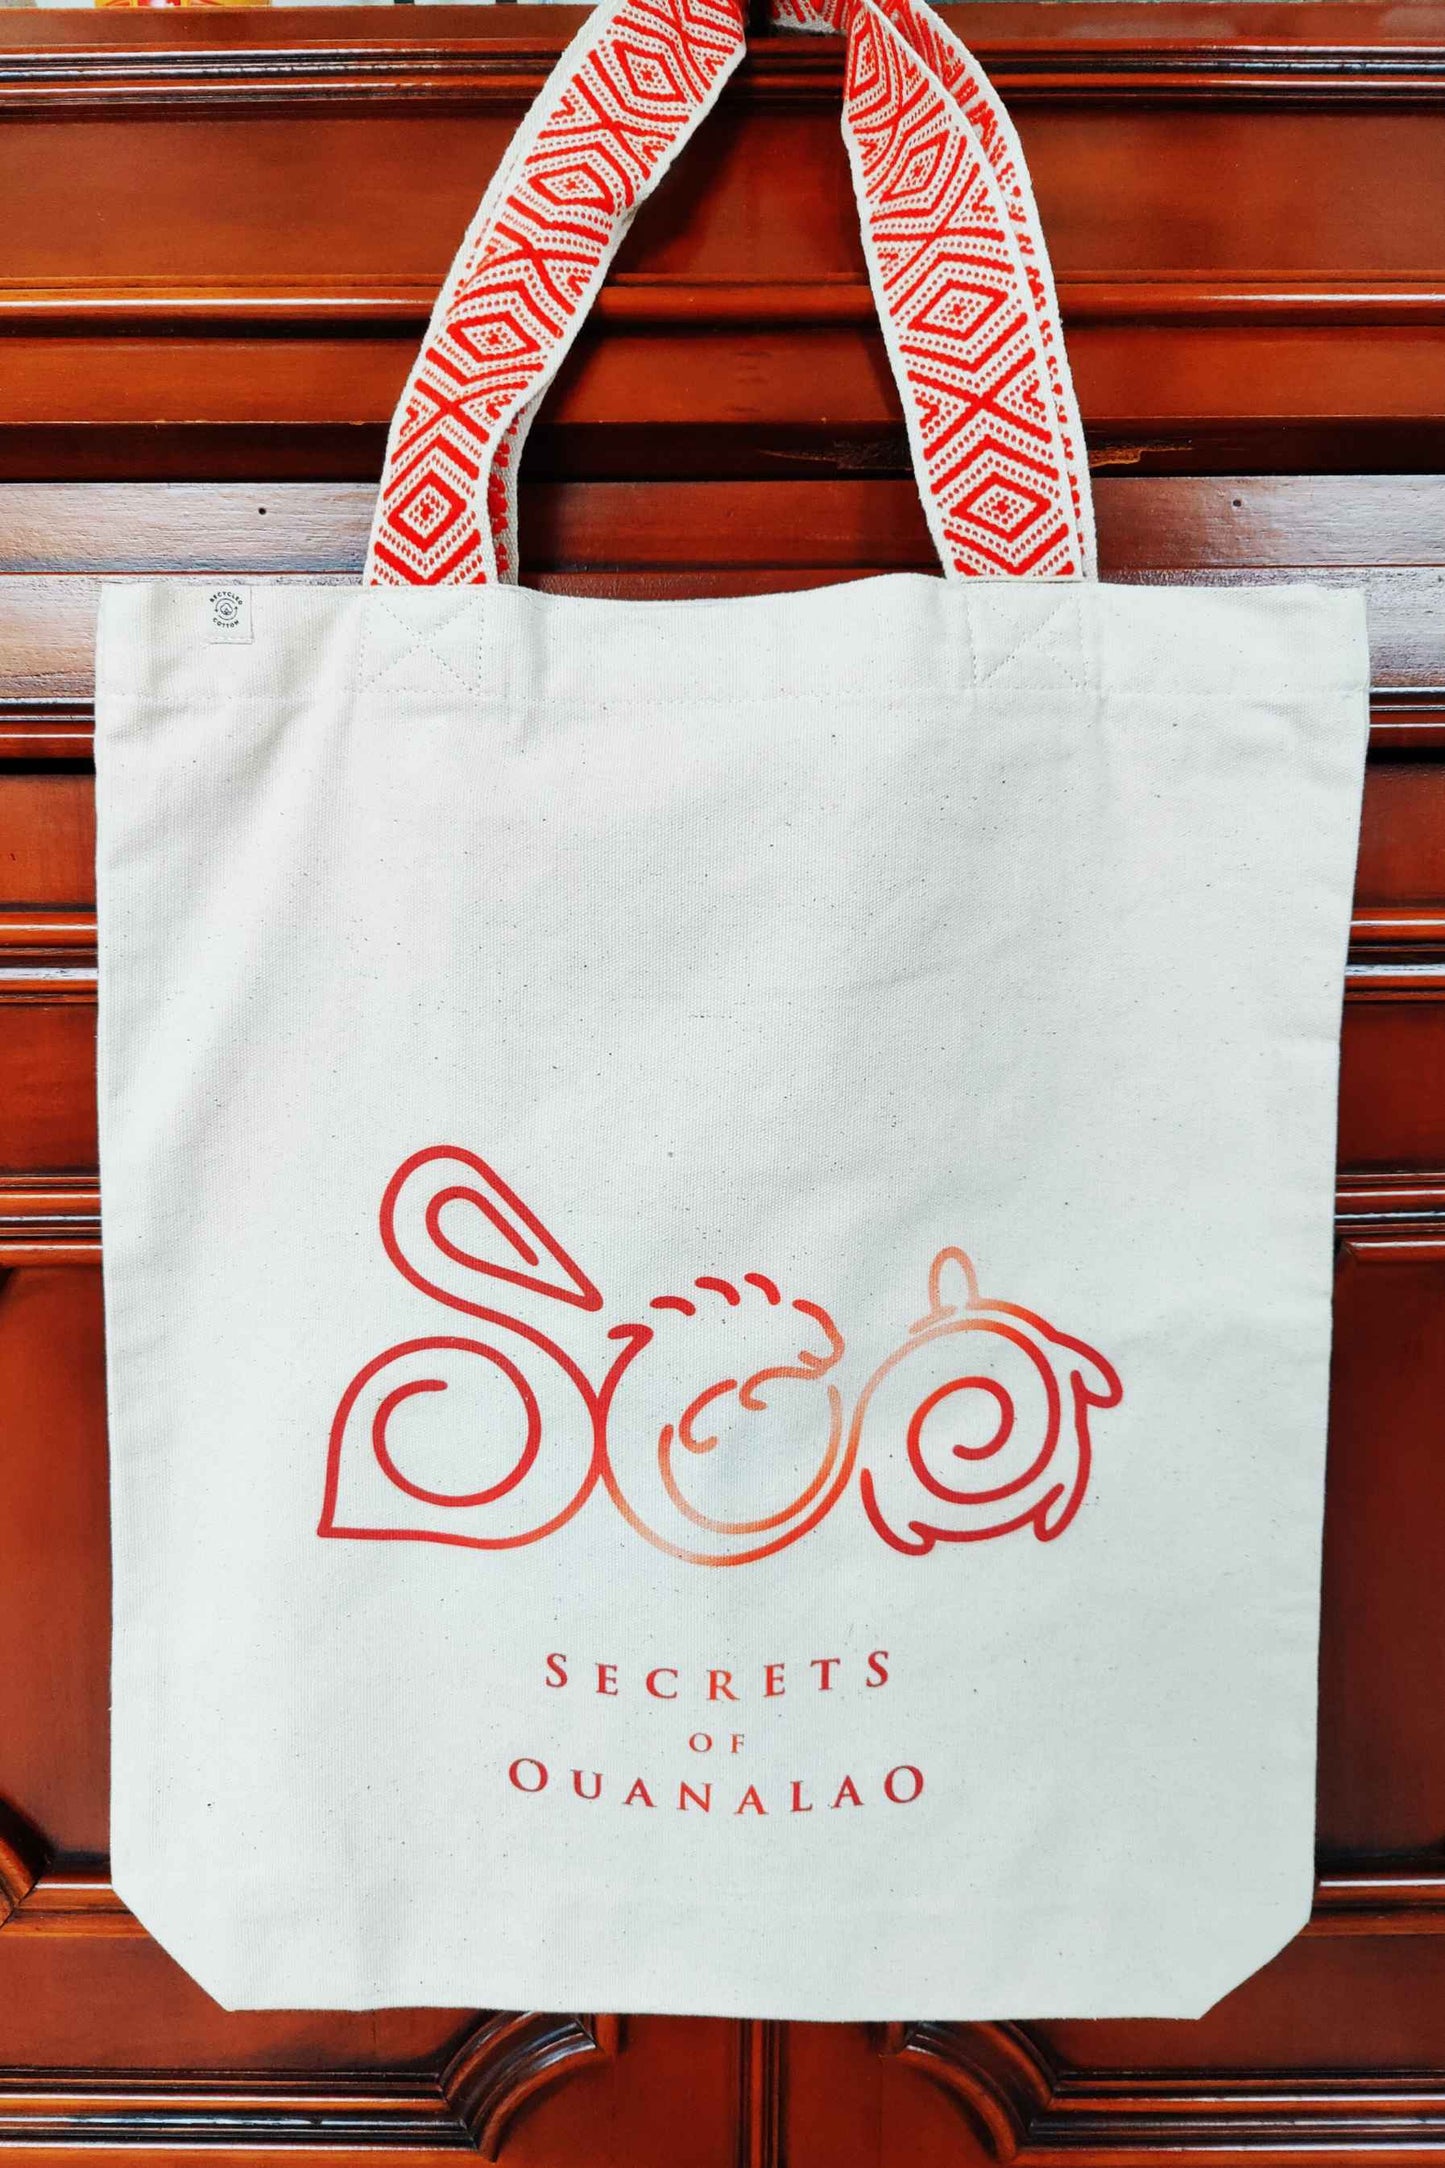 Vegan tote bag with red handles and logo, including inside zipper pocket. The tote bag is made of recycled cotton.